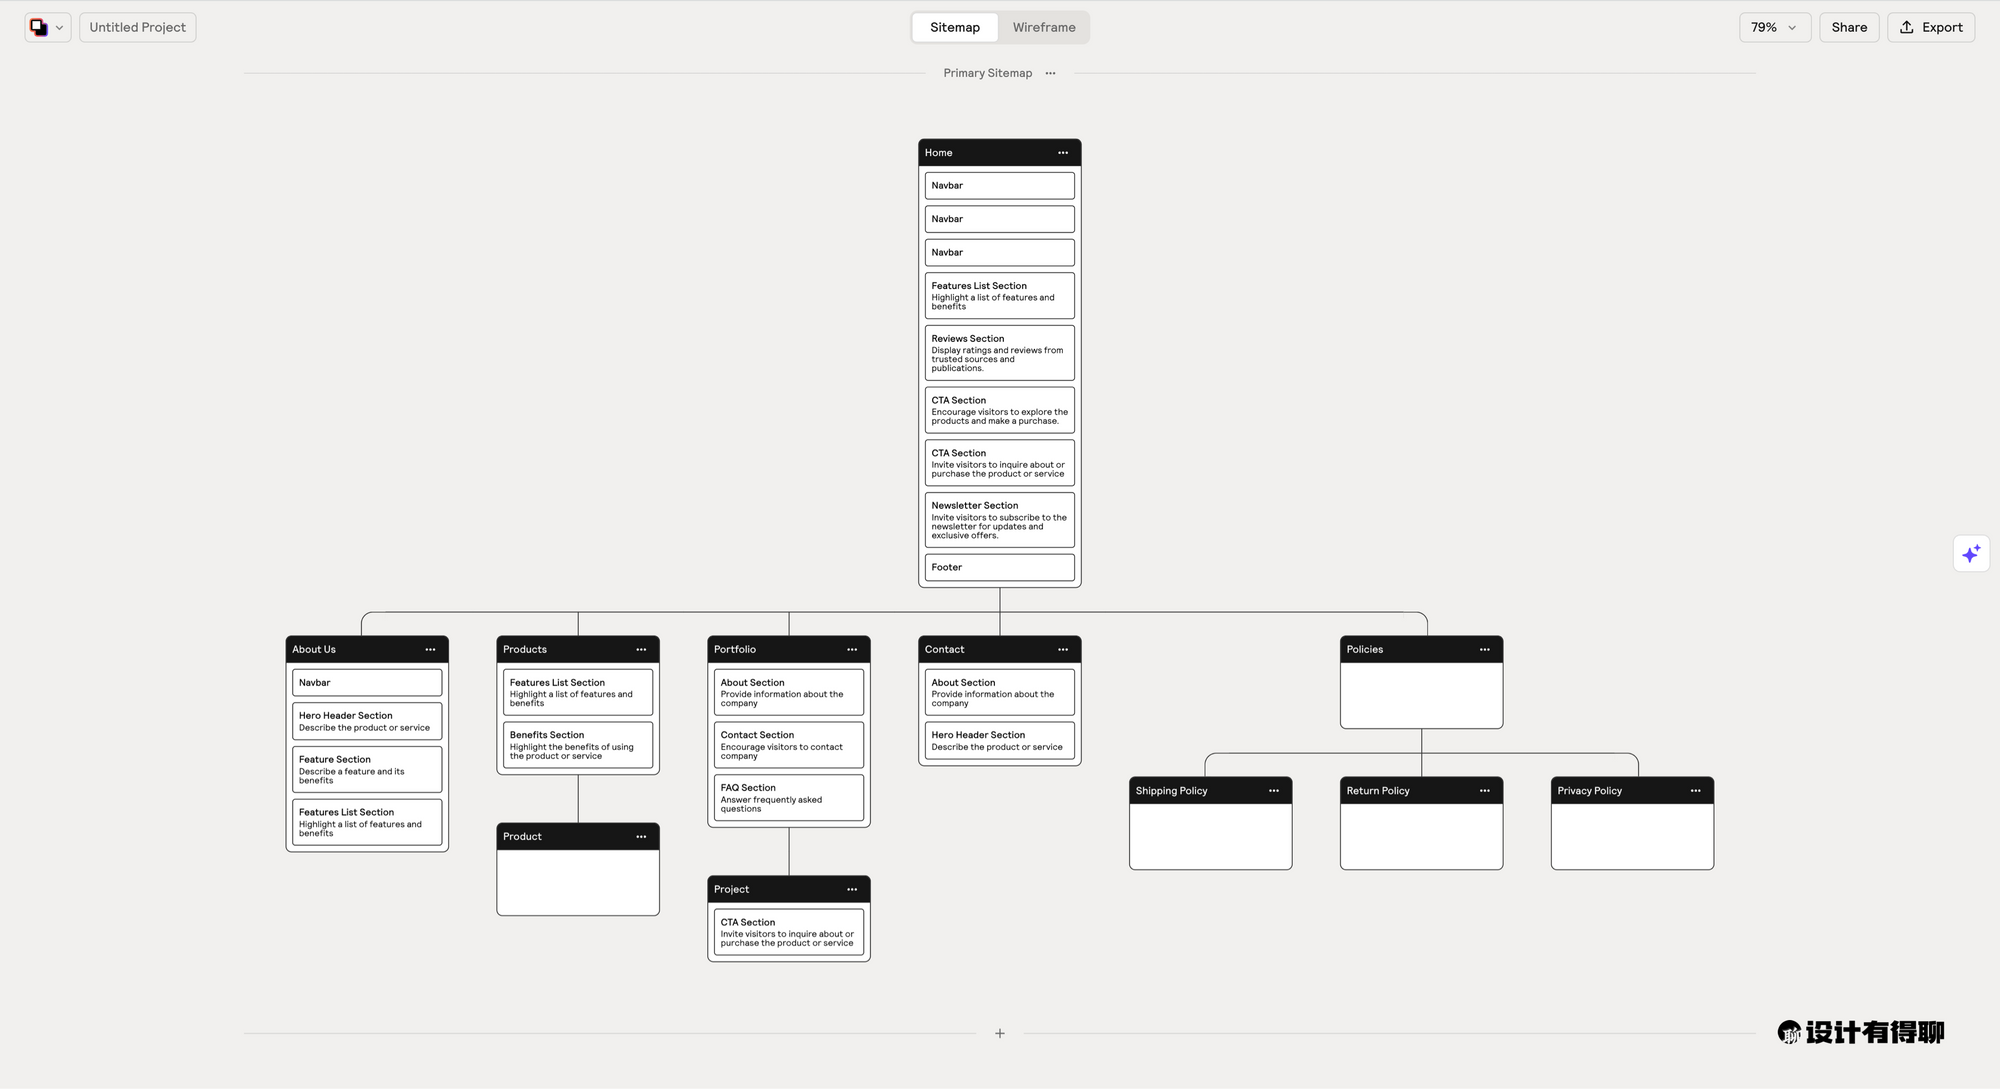 Diving into Relume through Sitemap